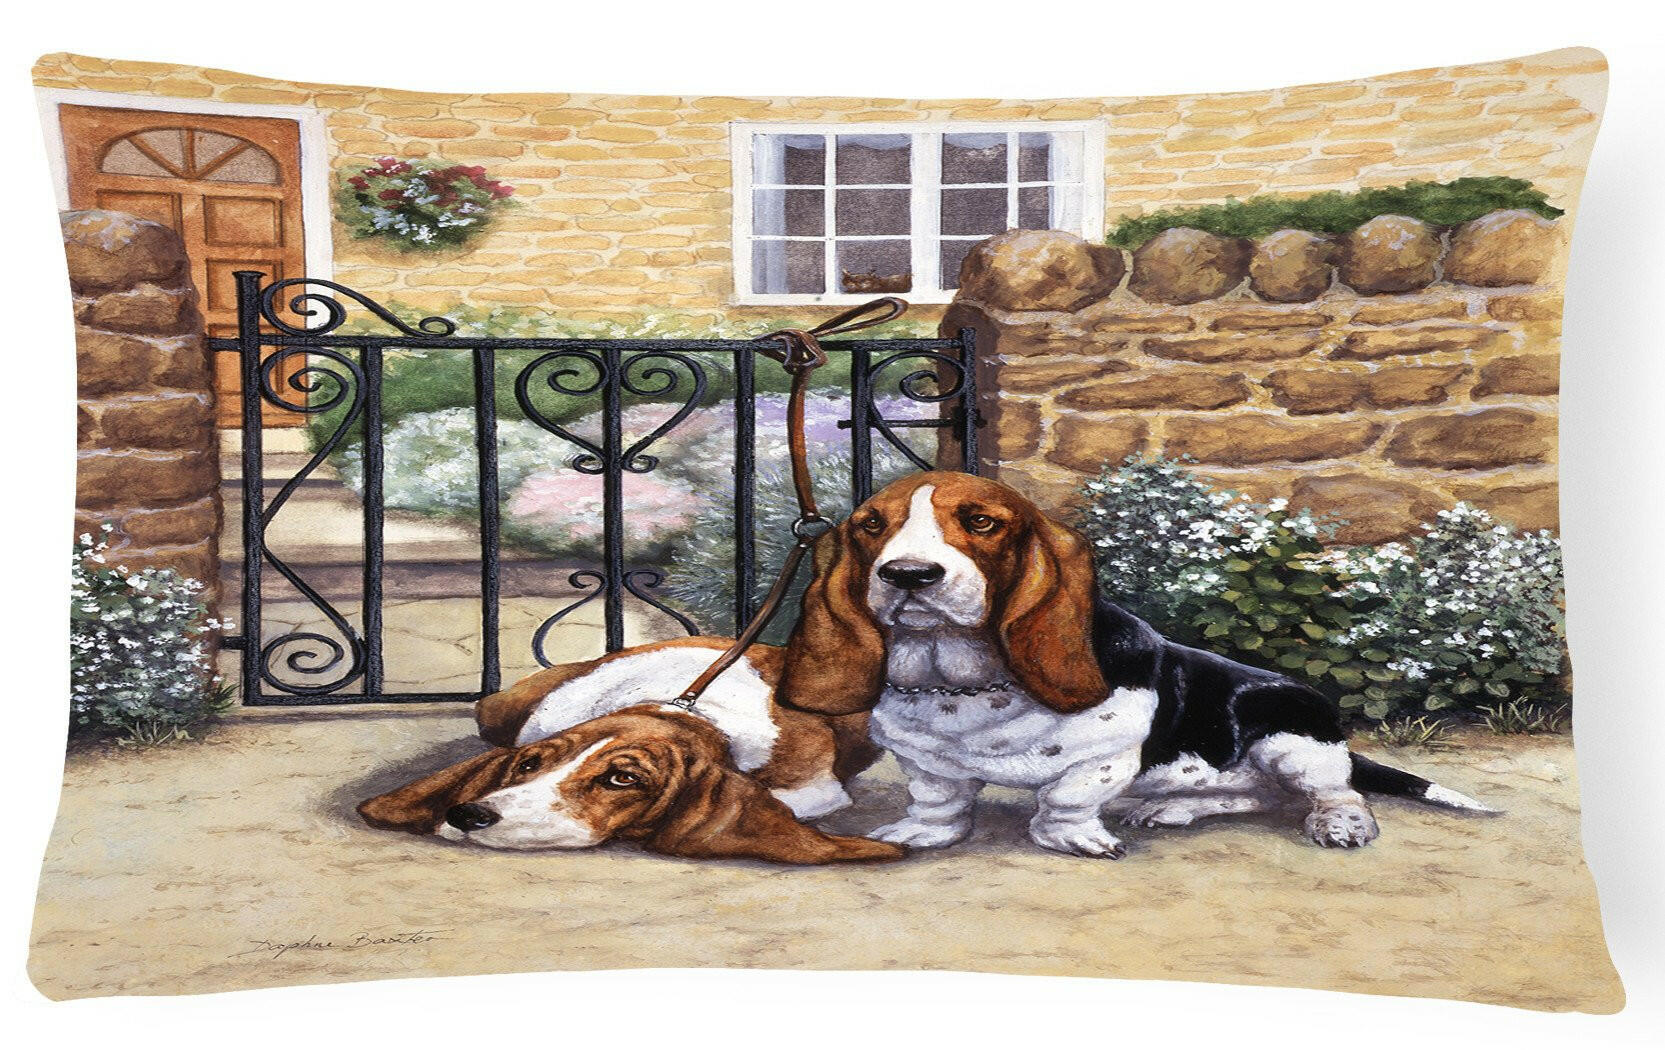 Basset Hound at the gate Fabric Decorative Pillow BDBA0312PW1216 by Caroline's Treasures